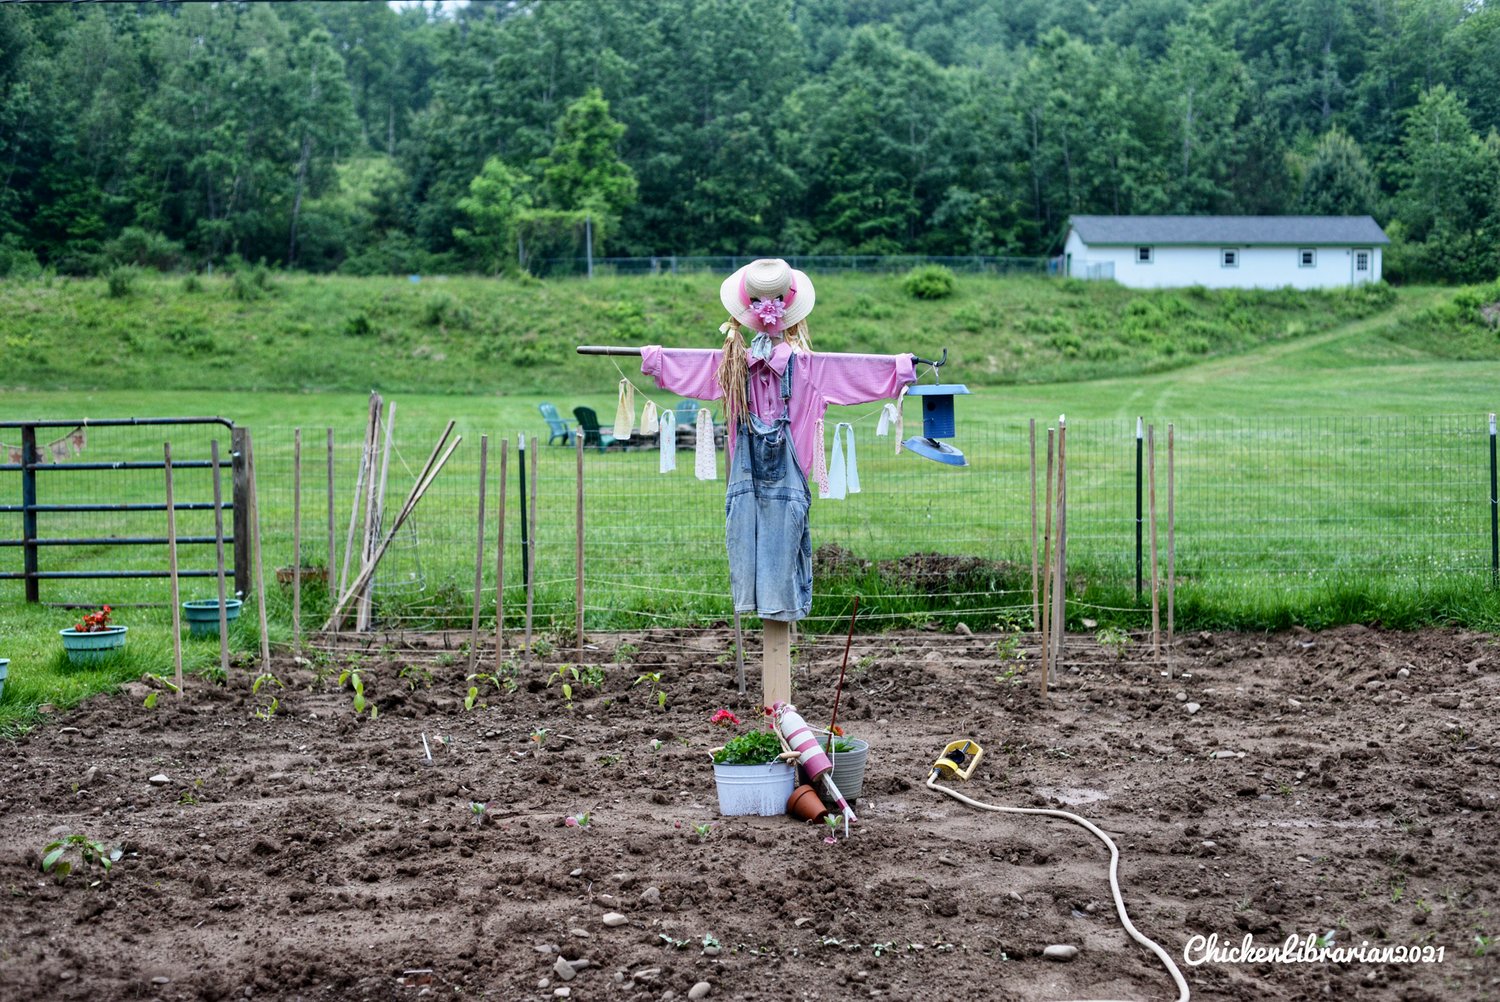 A scarecrow watches over the garden at the White homestead.